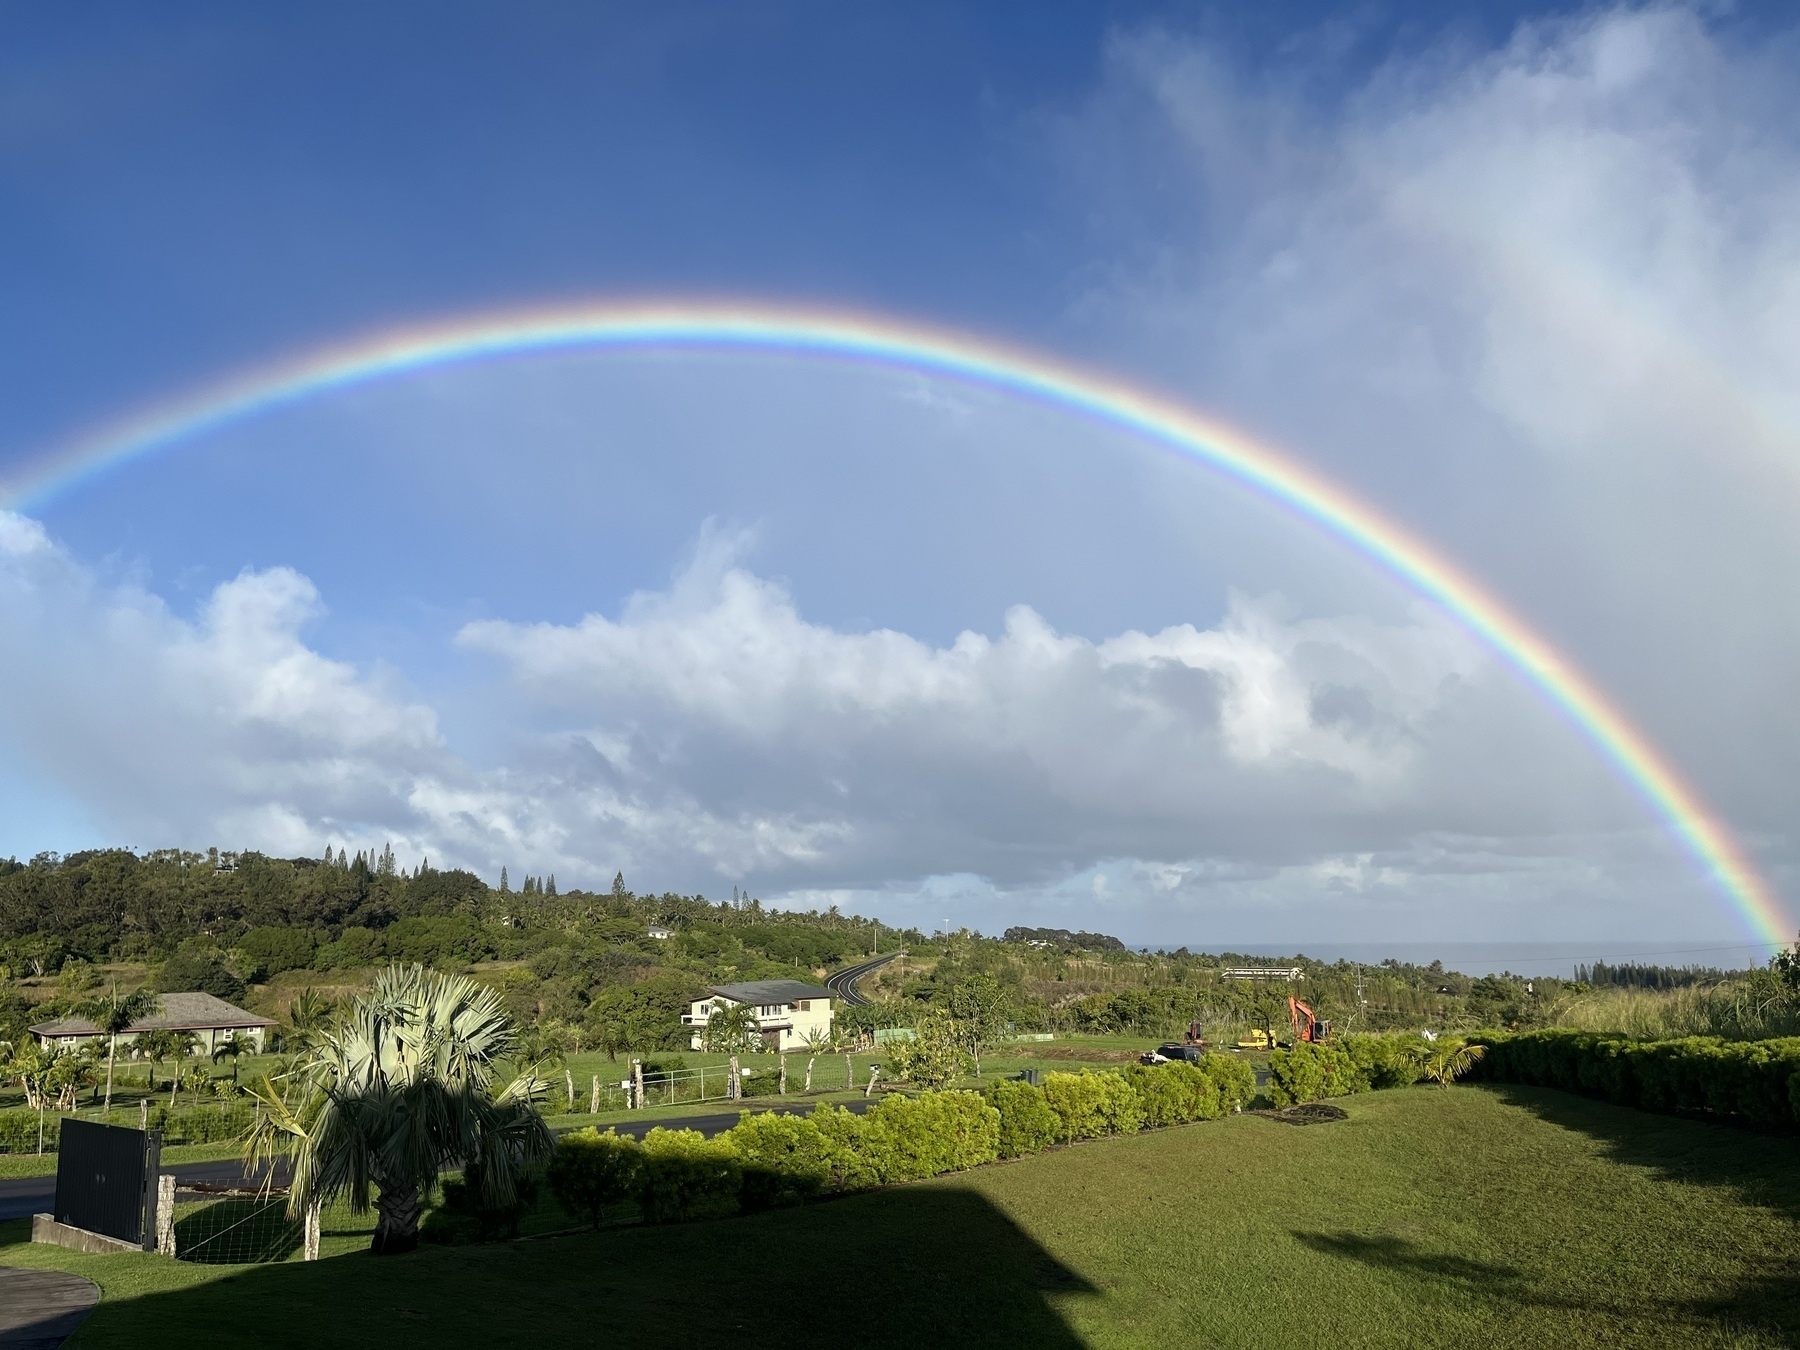 A full rainbow arching across a blue sky with scattered cloud. Beneath the rainbow is a tropical rural scene with a couple of houses a road going up a hill and curving away. The grey ocean is in the distance